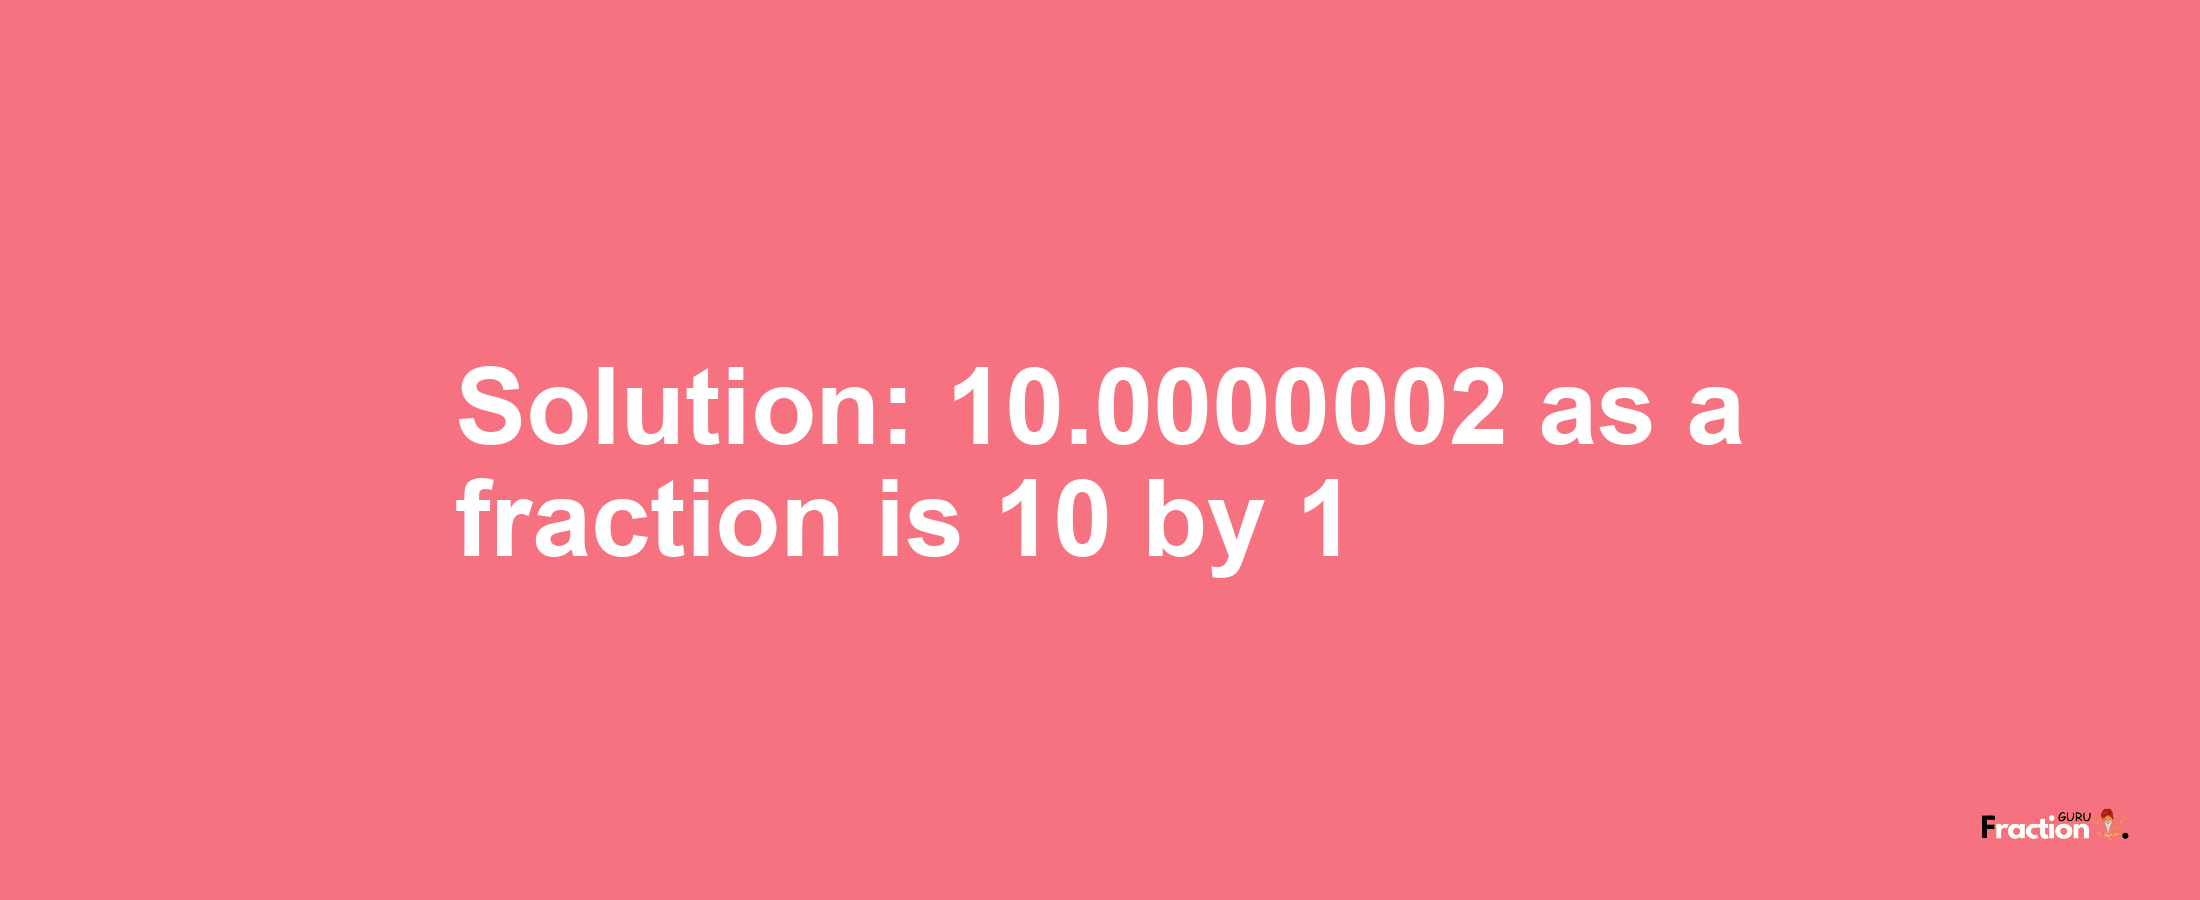 Solution:10.0000002 as a fraction is 10/1